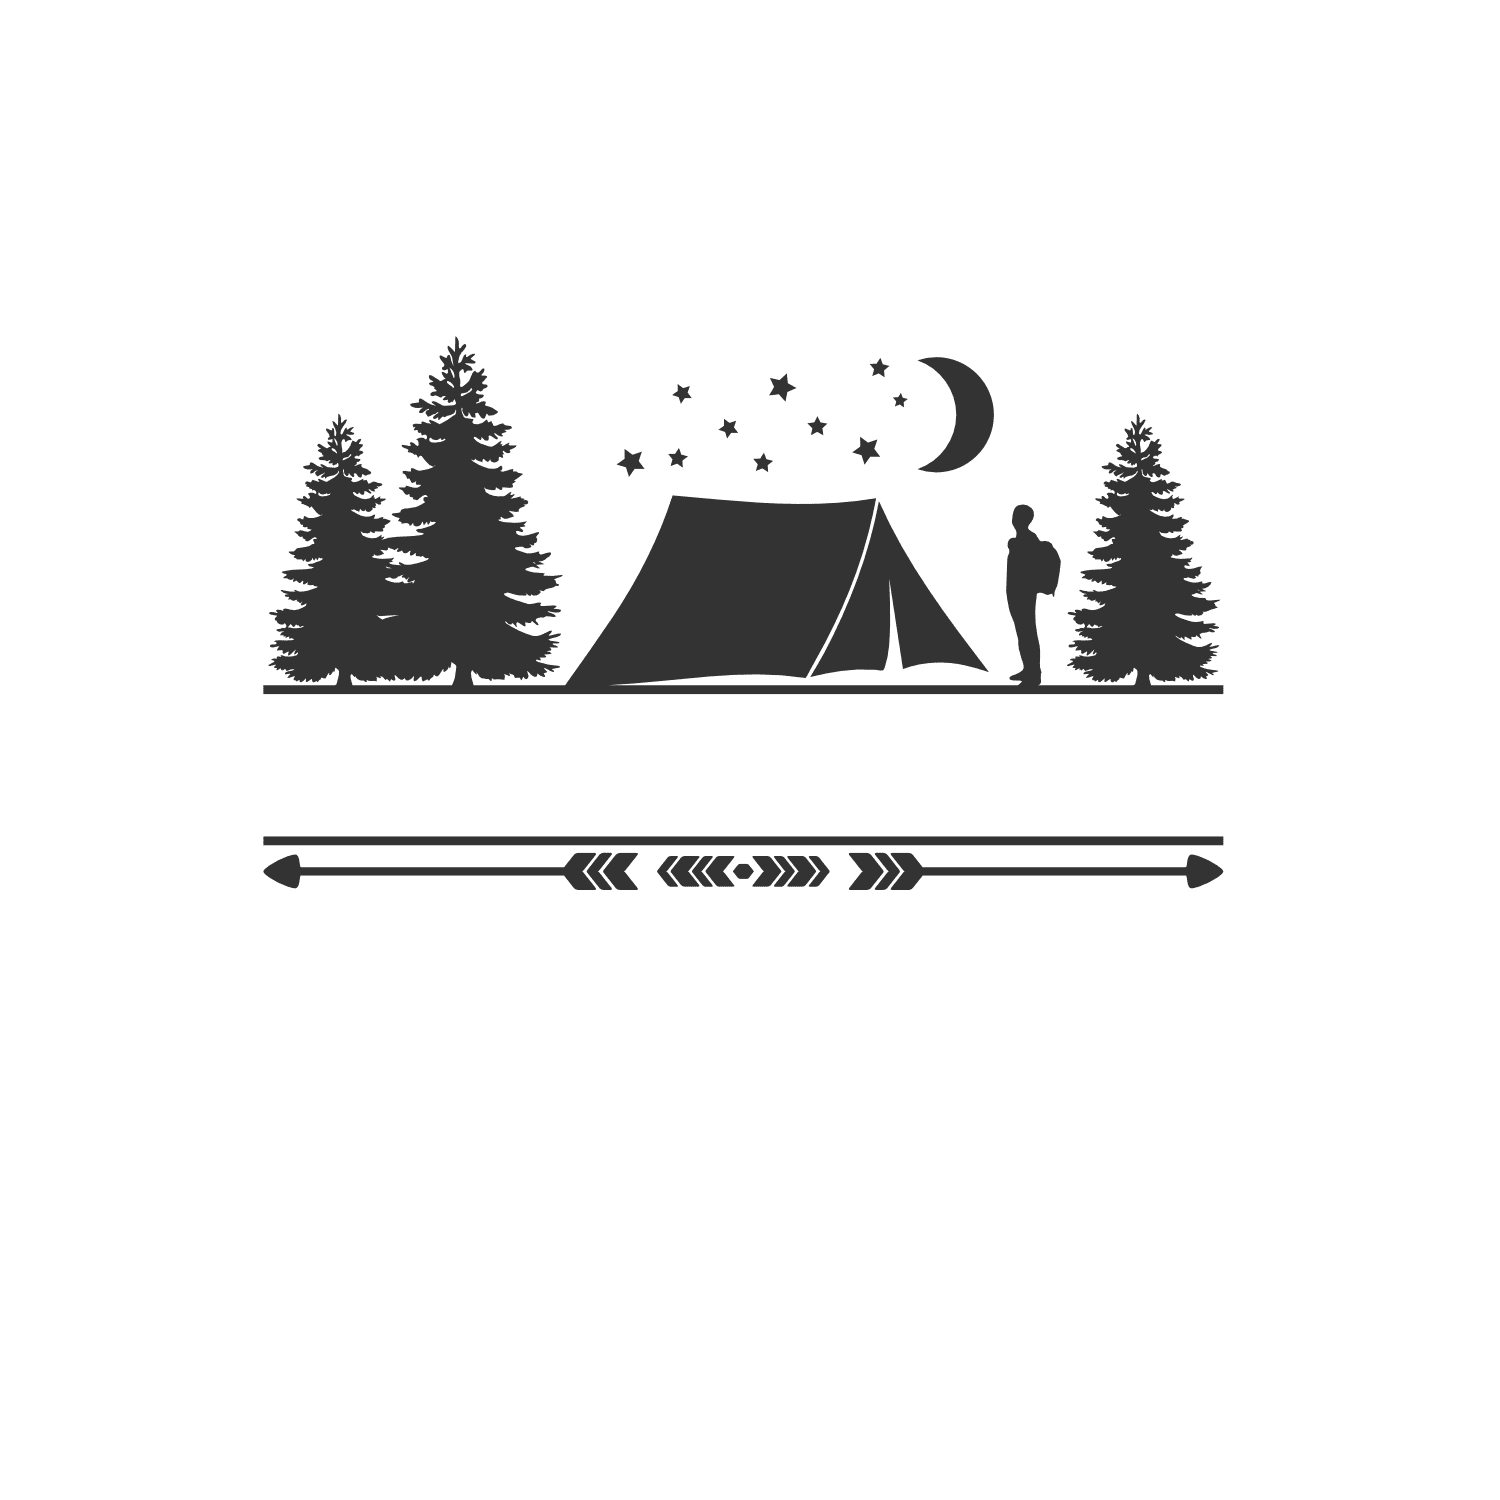 camping-split-text-frame-tent-trees-night-sky-free-svg-file-SvgHeart.Com